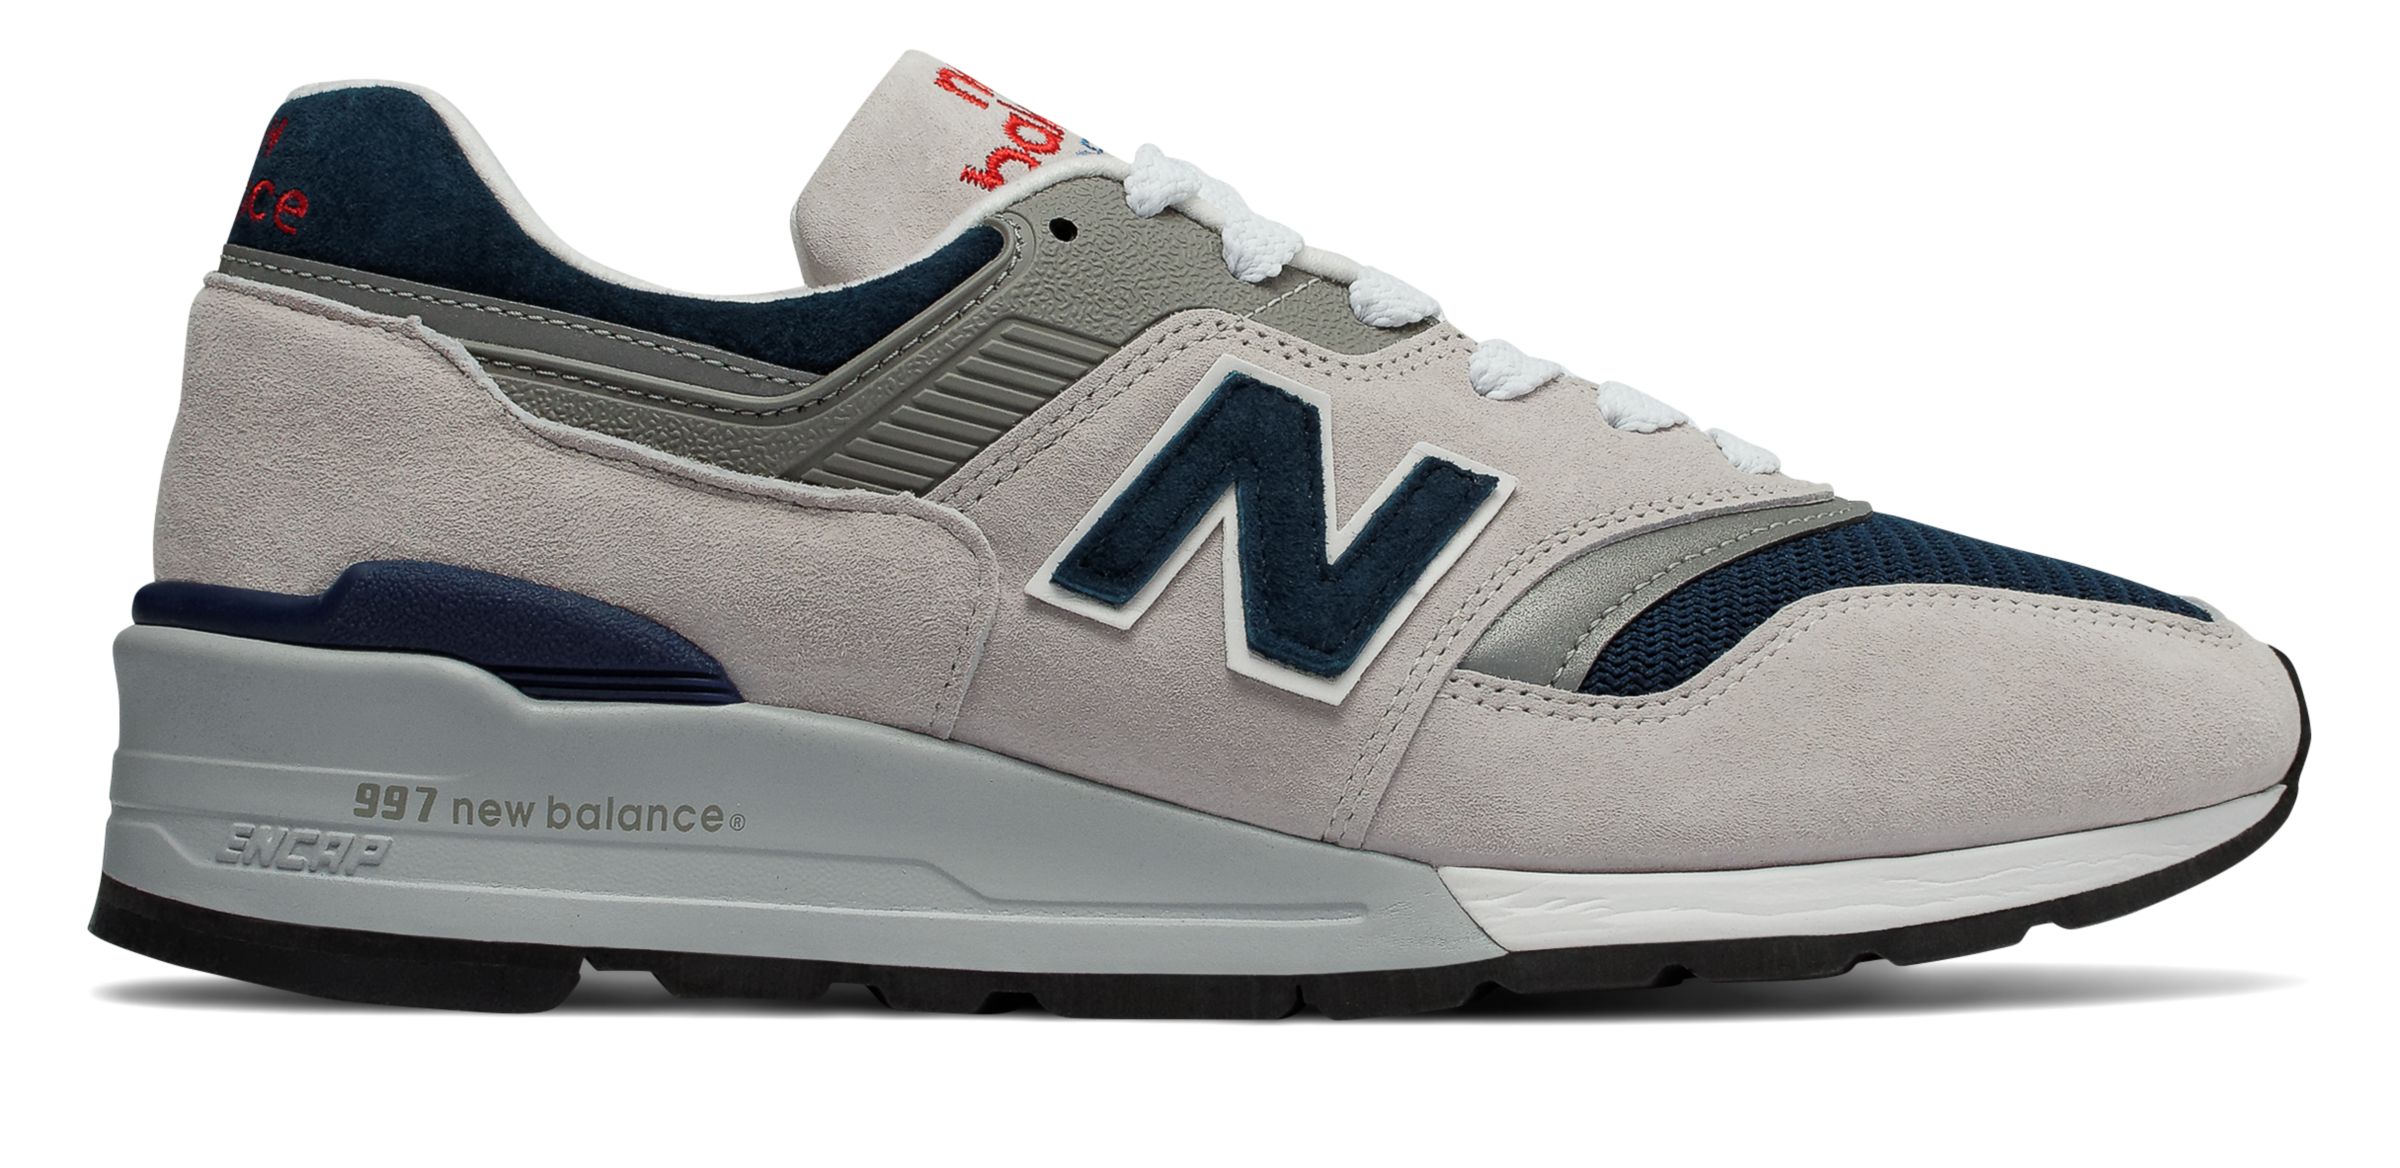 Men's 997 Made in US Shoes - New Balance